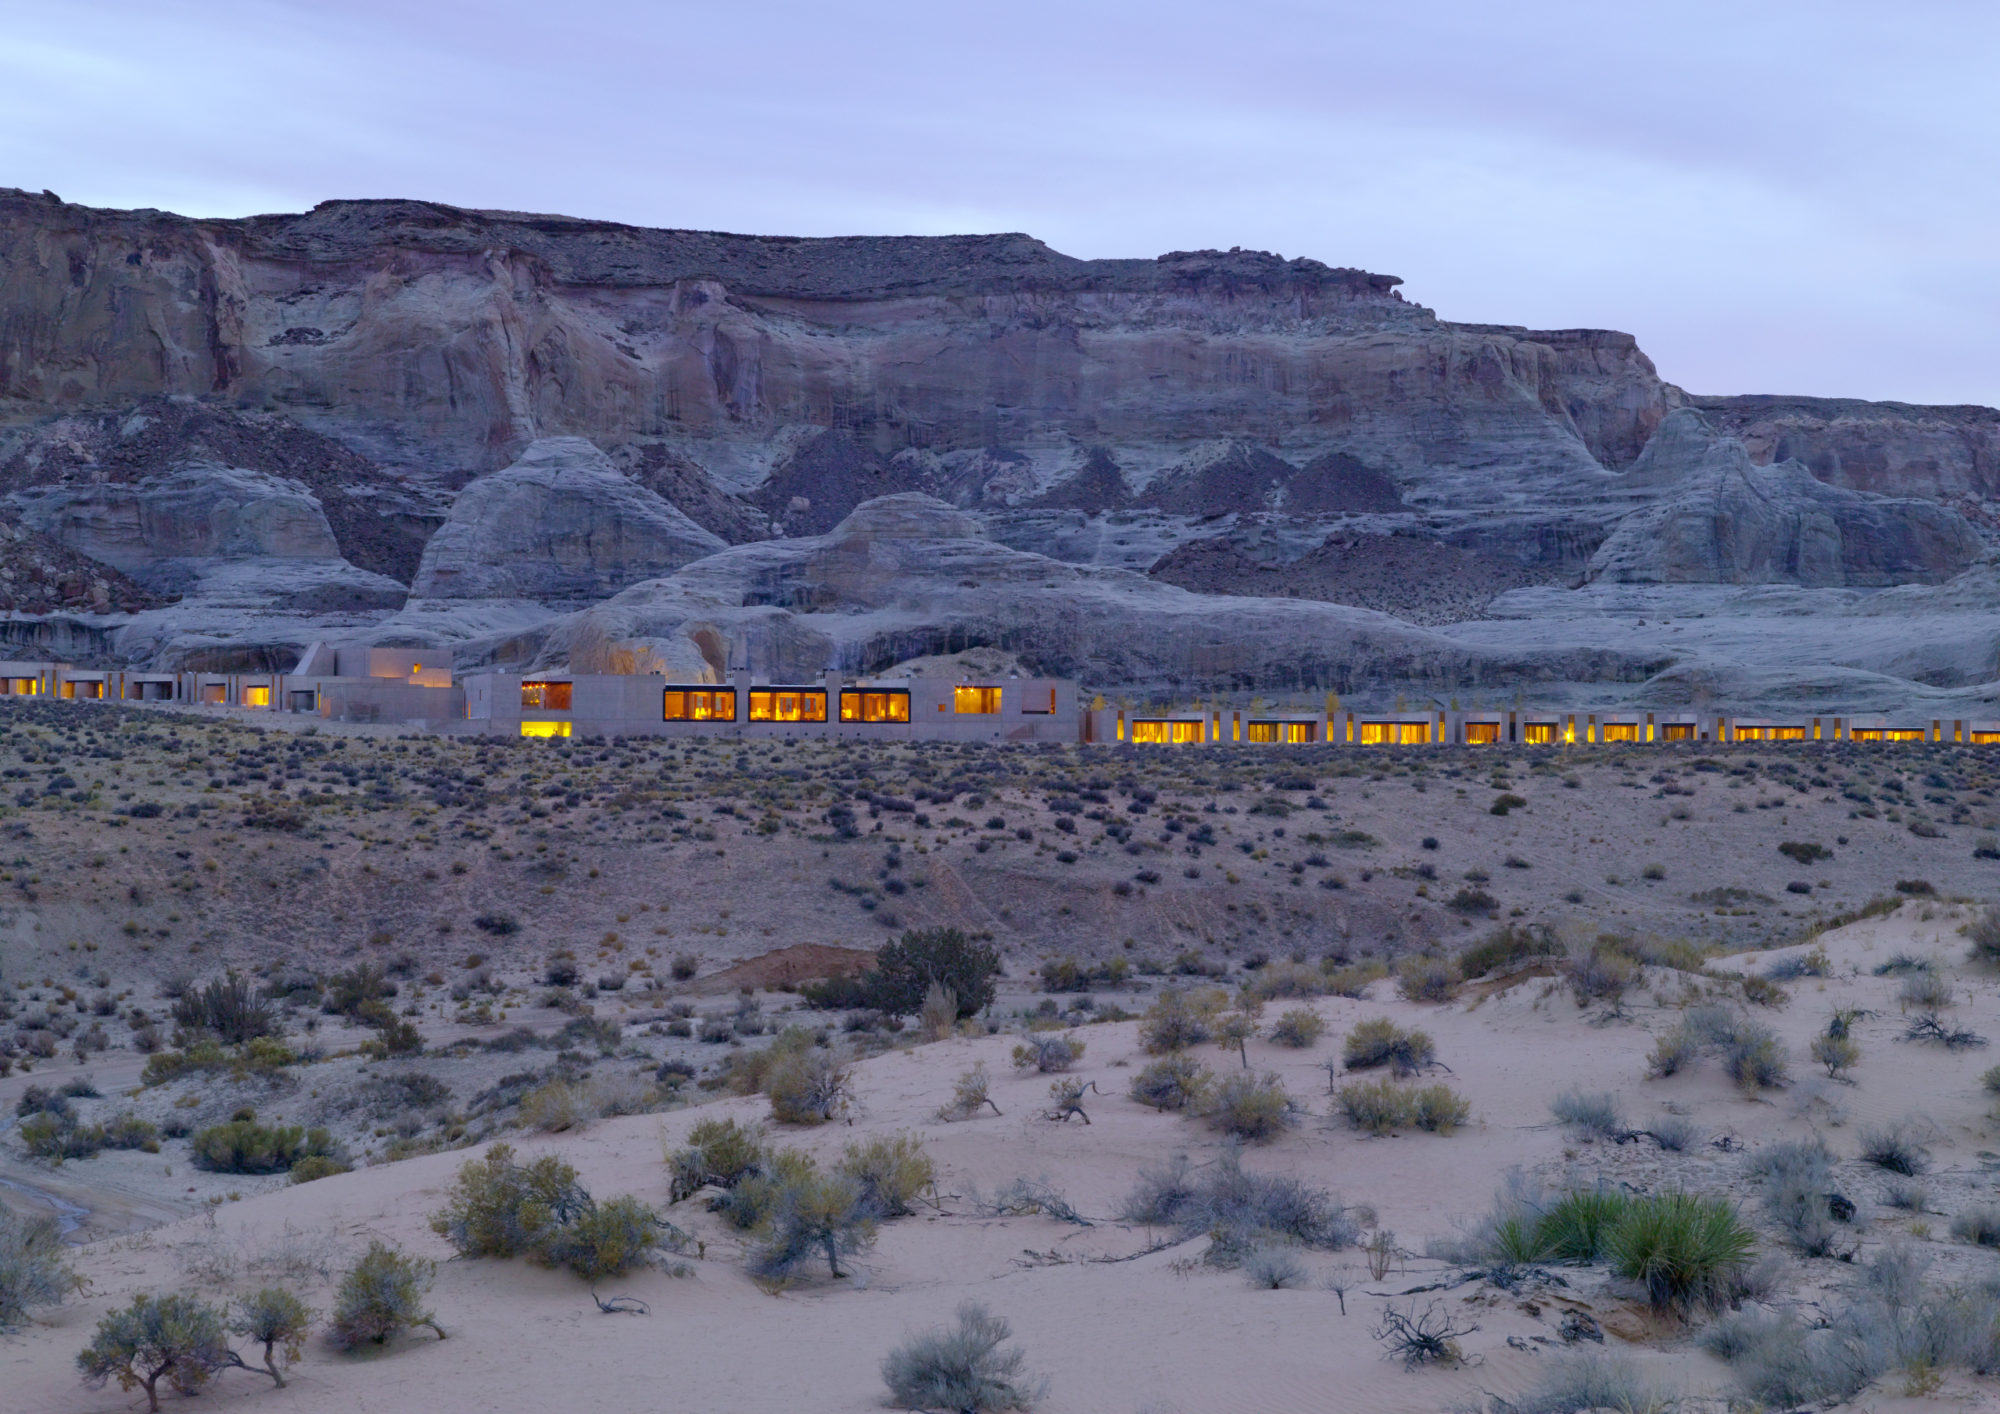 In the June edition of the Founder Series, Homi Vazifdar shares how he co-founded Utah's Amangiri resort.